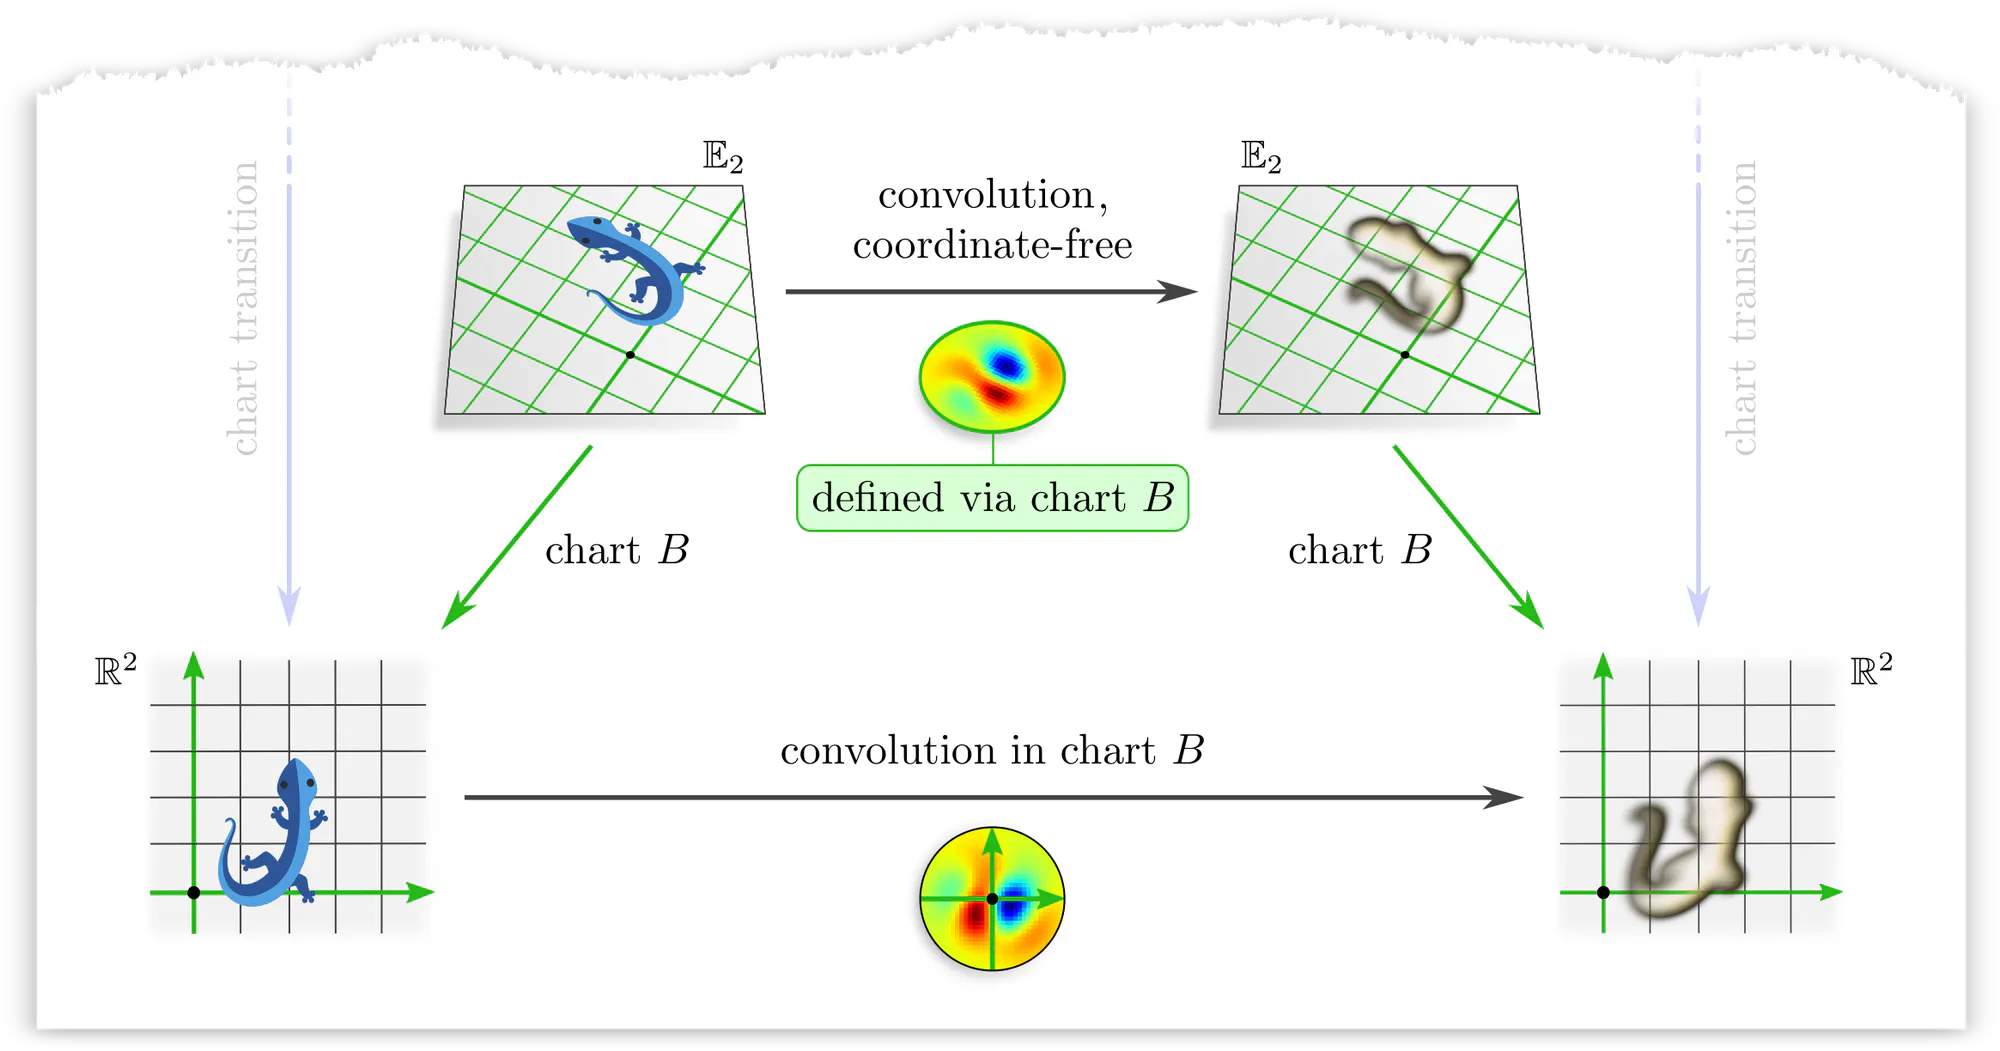 Convolution operation, defined by applying a given kernel in chart B.